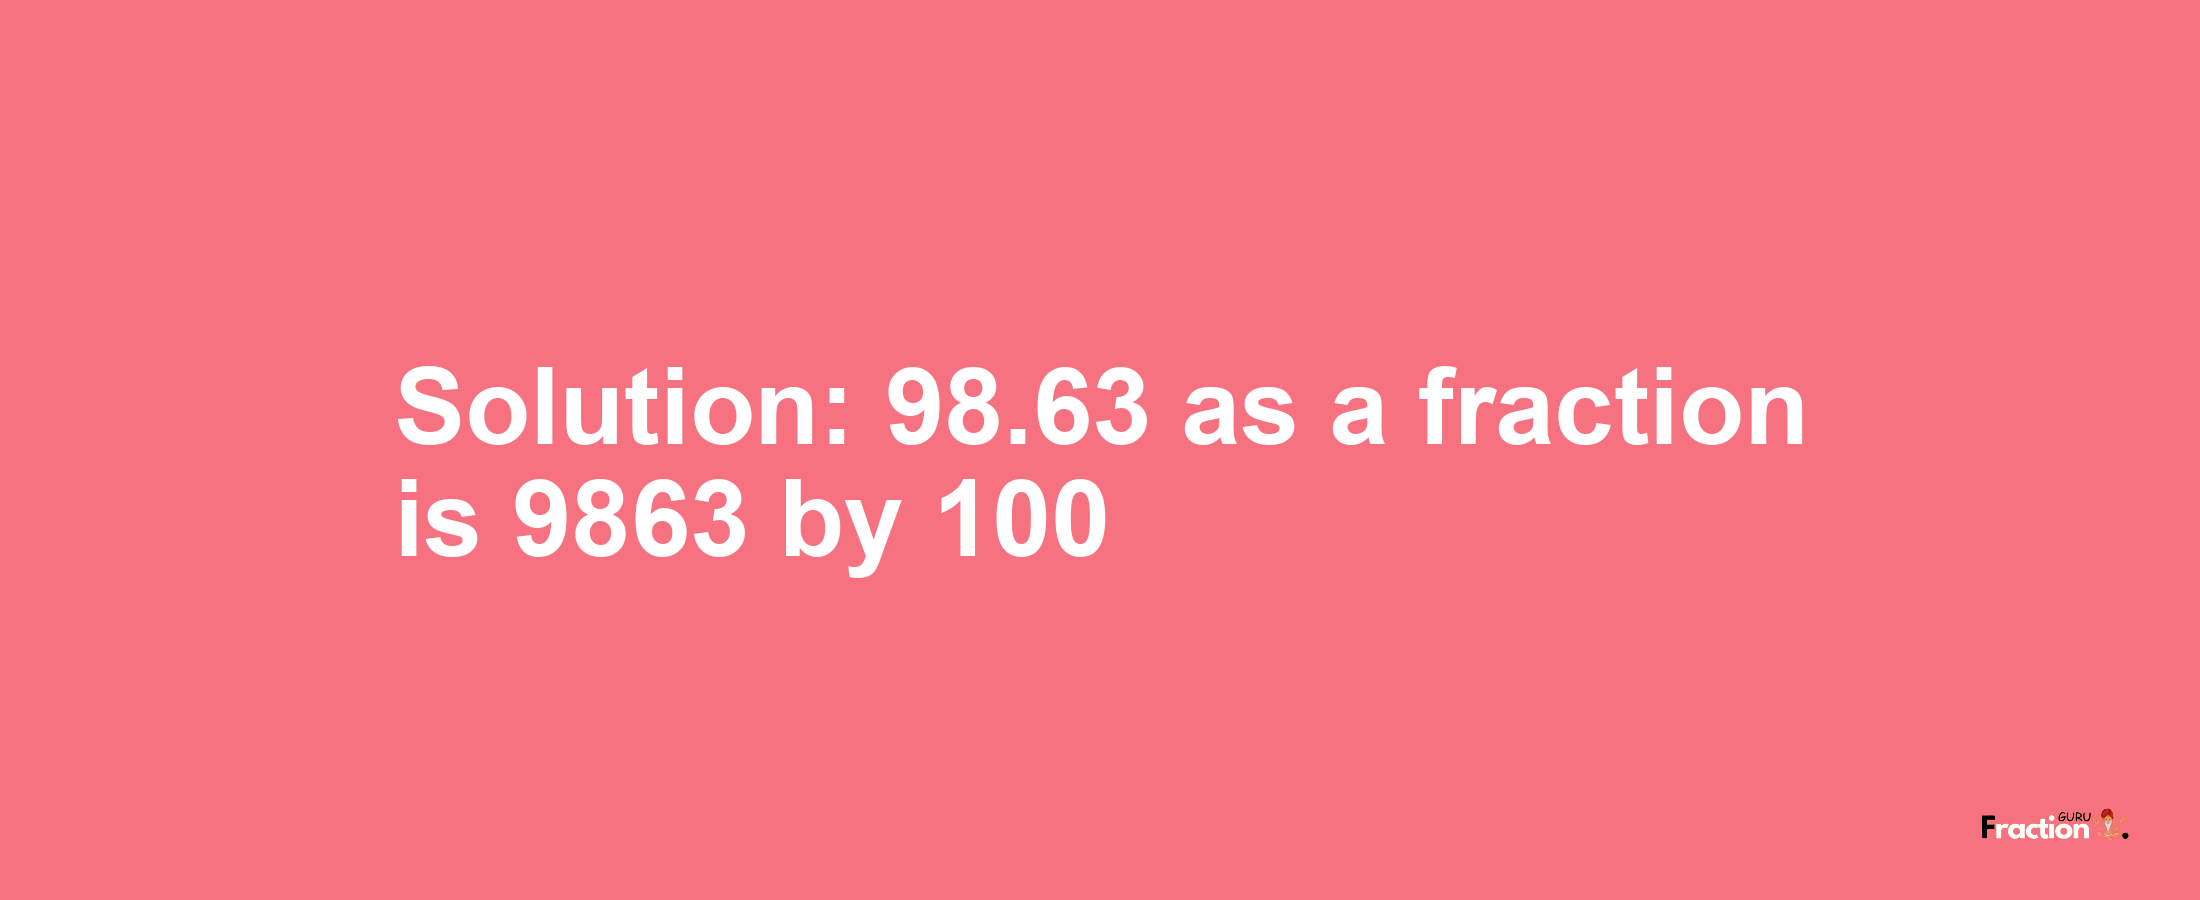 Solution:98.63 as a fraction is 9863/100